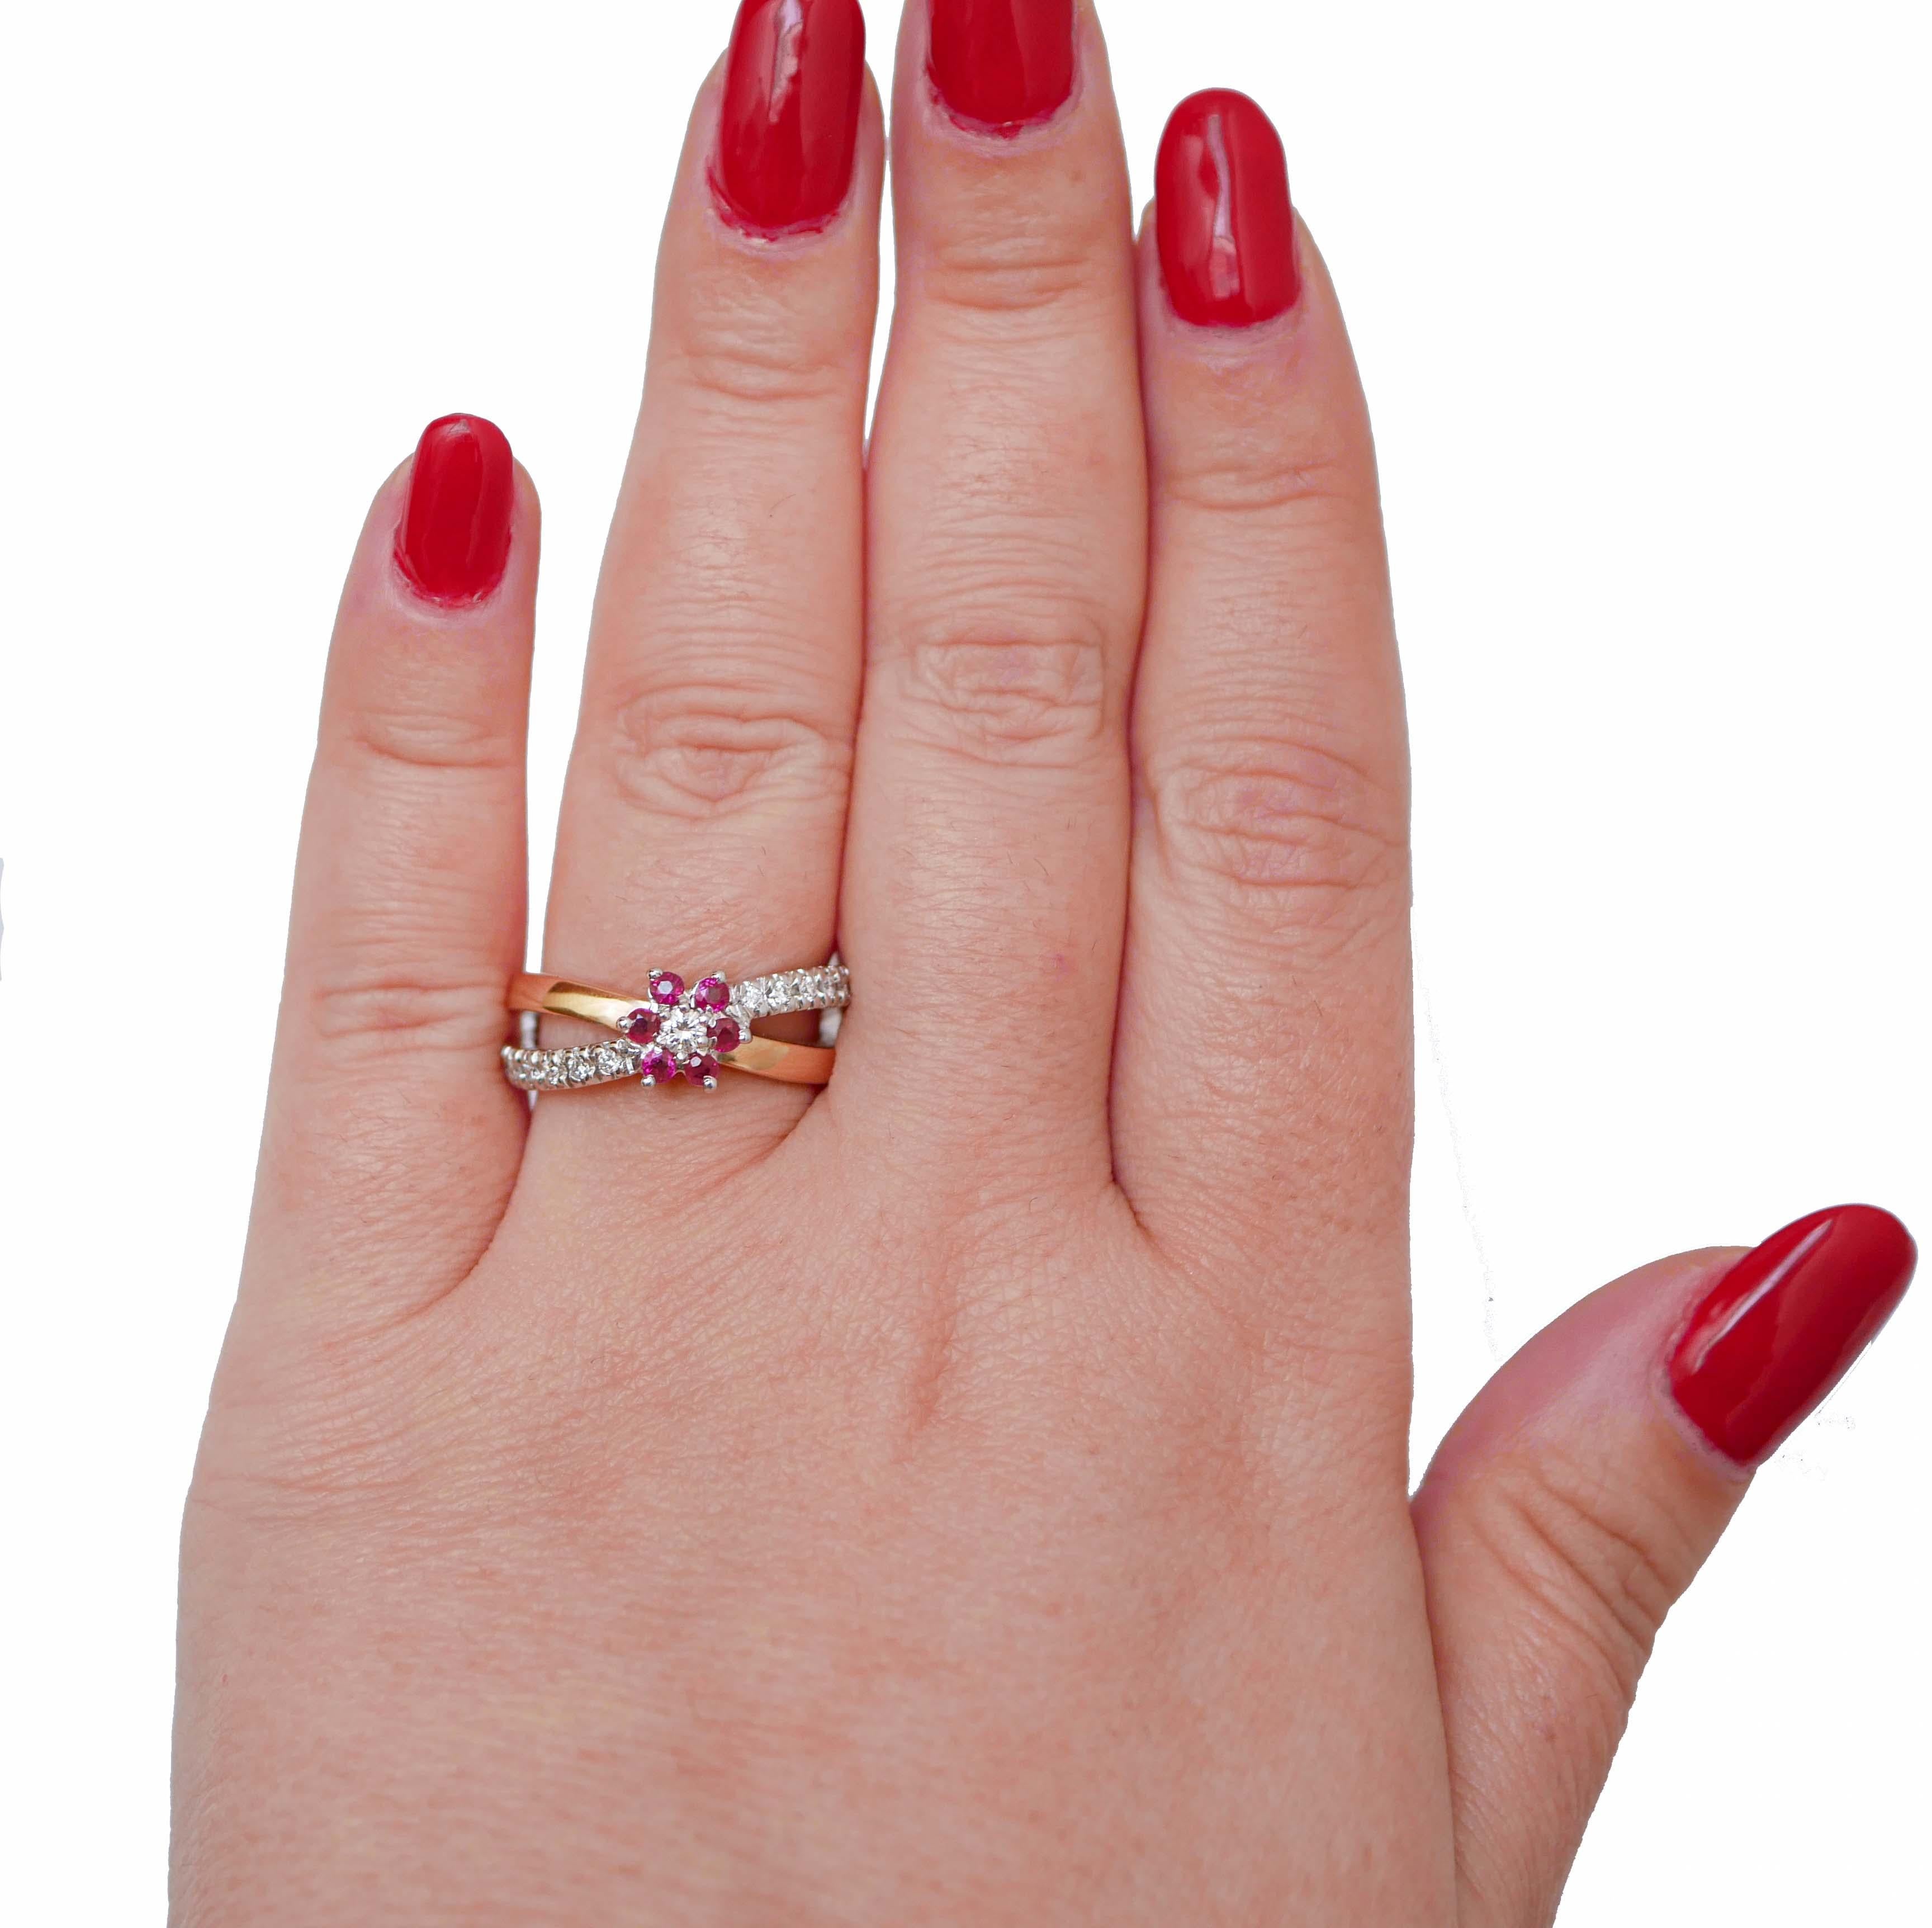 Mixed Cut Rubies, Diamonds, 18 Karat White Gold and Rose Gold Ring. For Sale